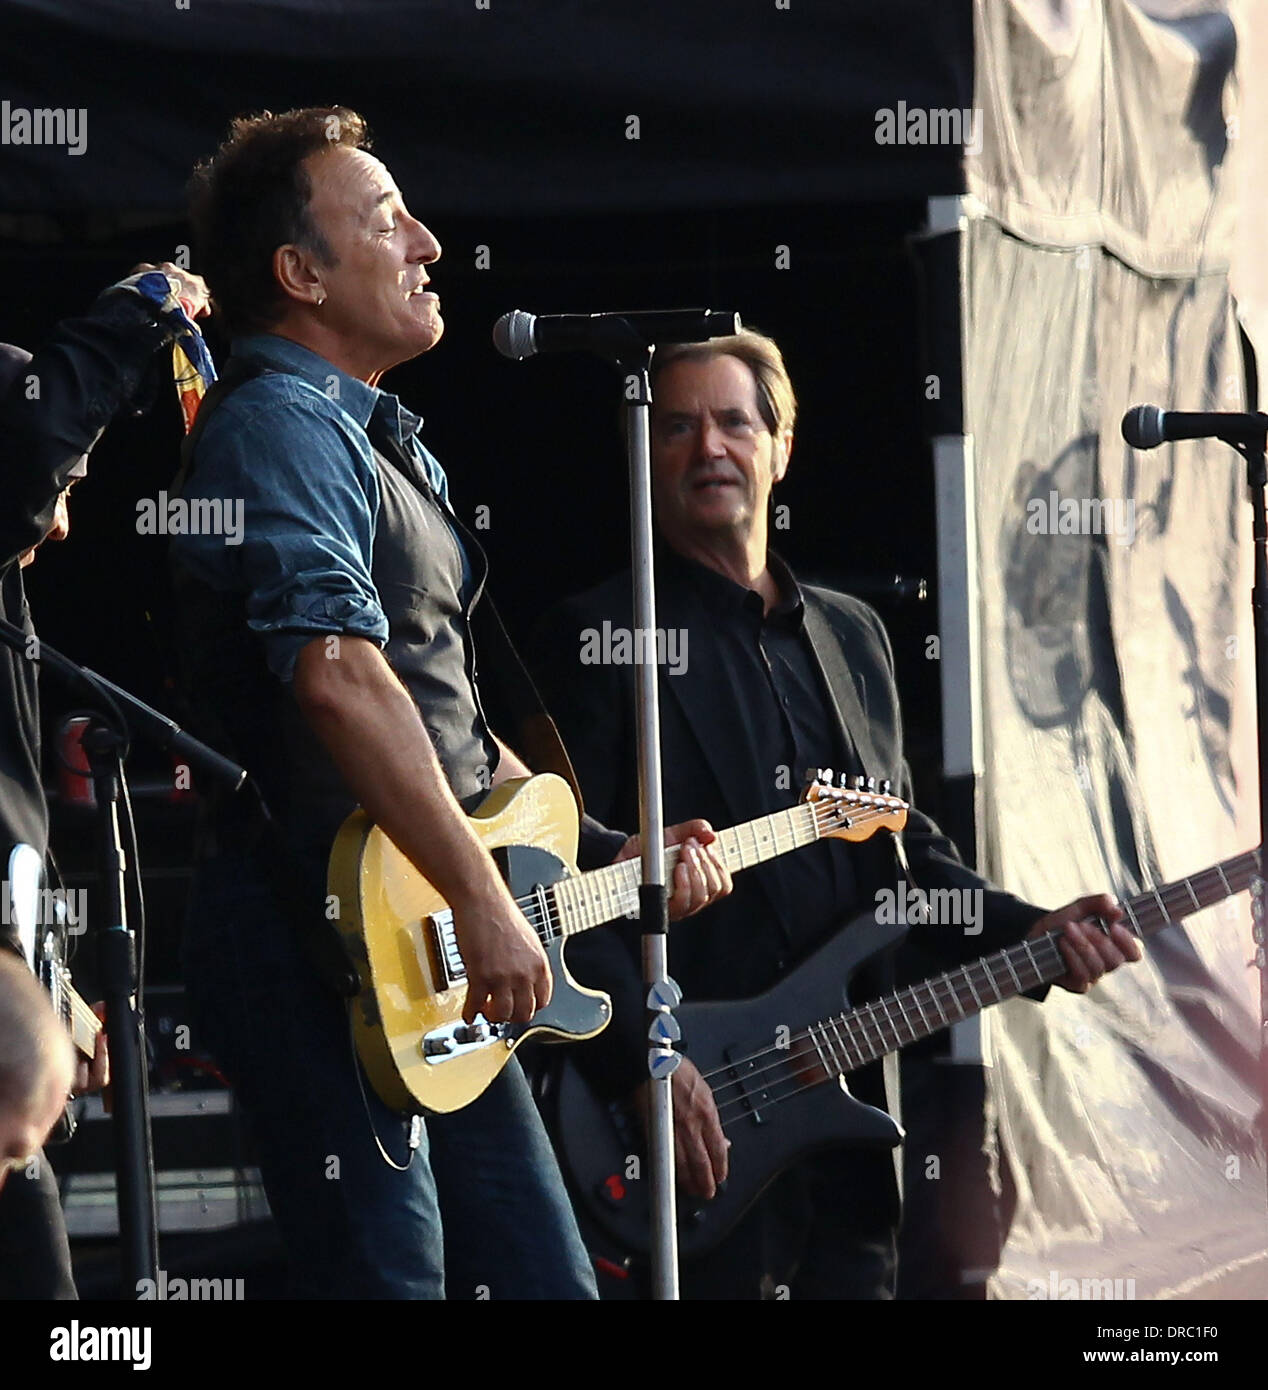 Bruce Springsteen and the E Street Band Hard Rock Calling - Hyde Park - Day 2 London, England - 14.07.12 Stock Photo